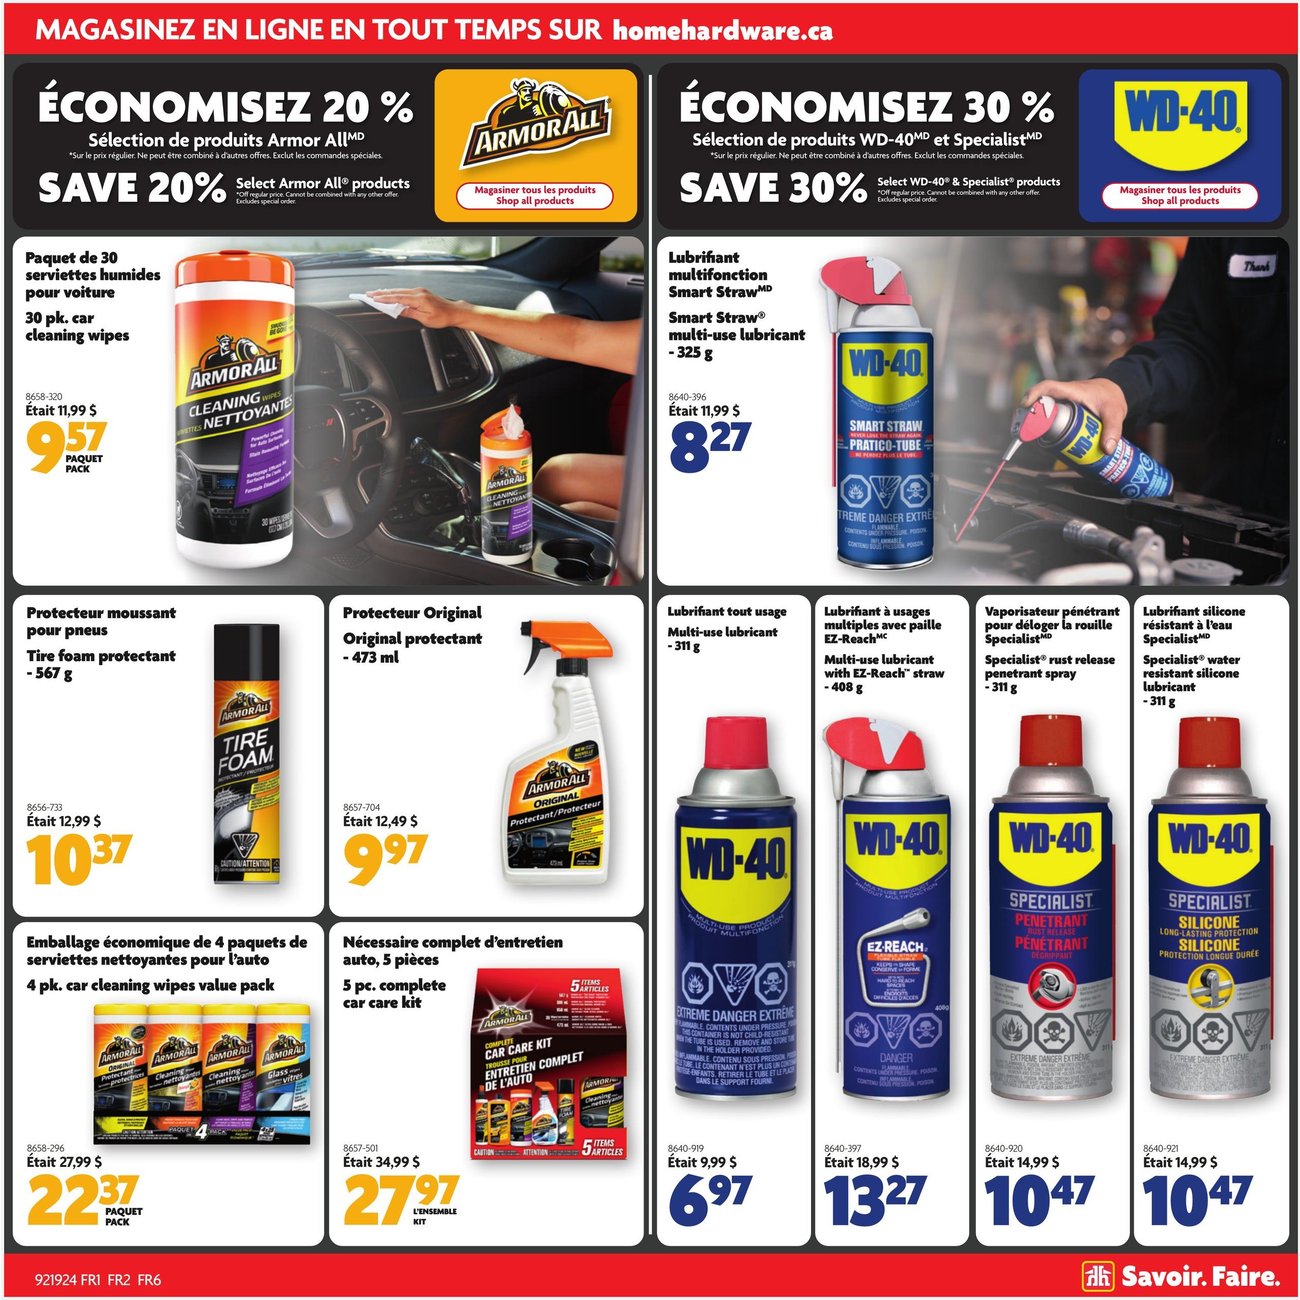 Home Hardware - Quebec - 2 Weeks of Savings - Page 11